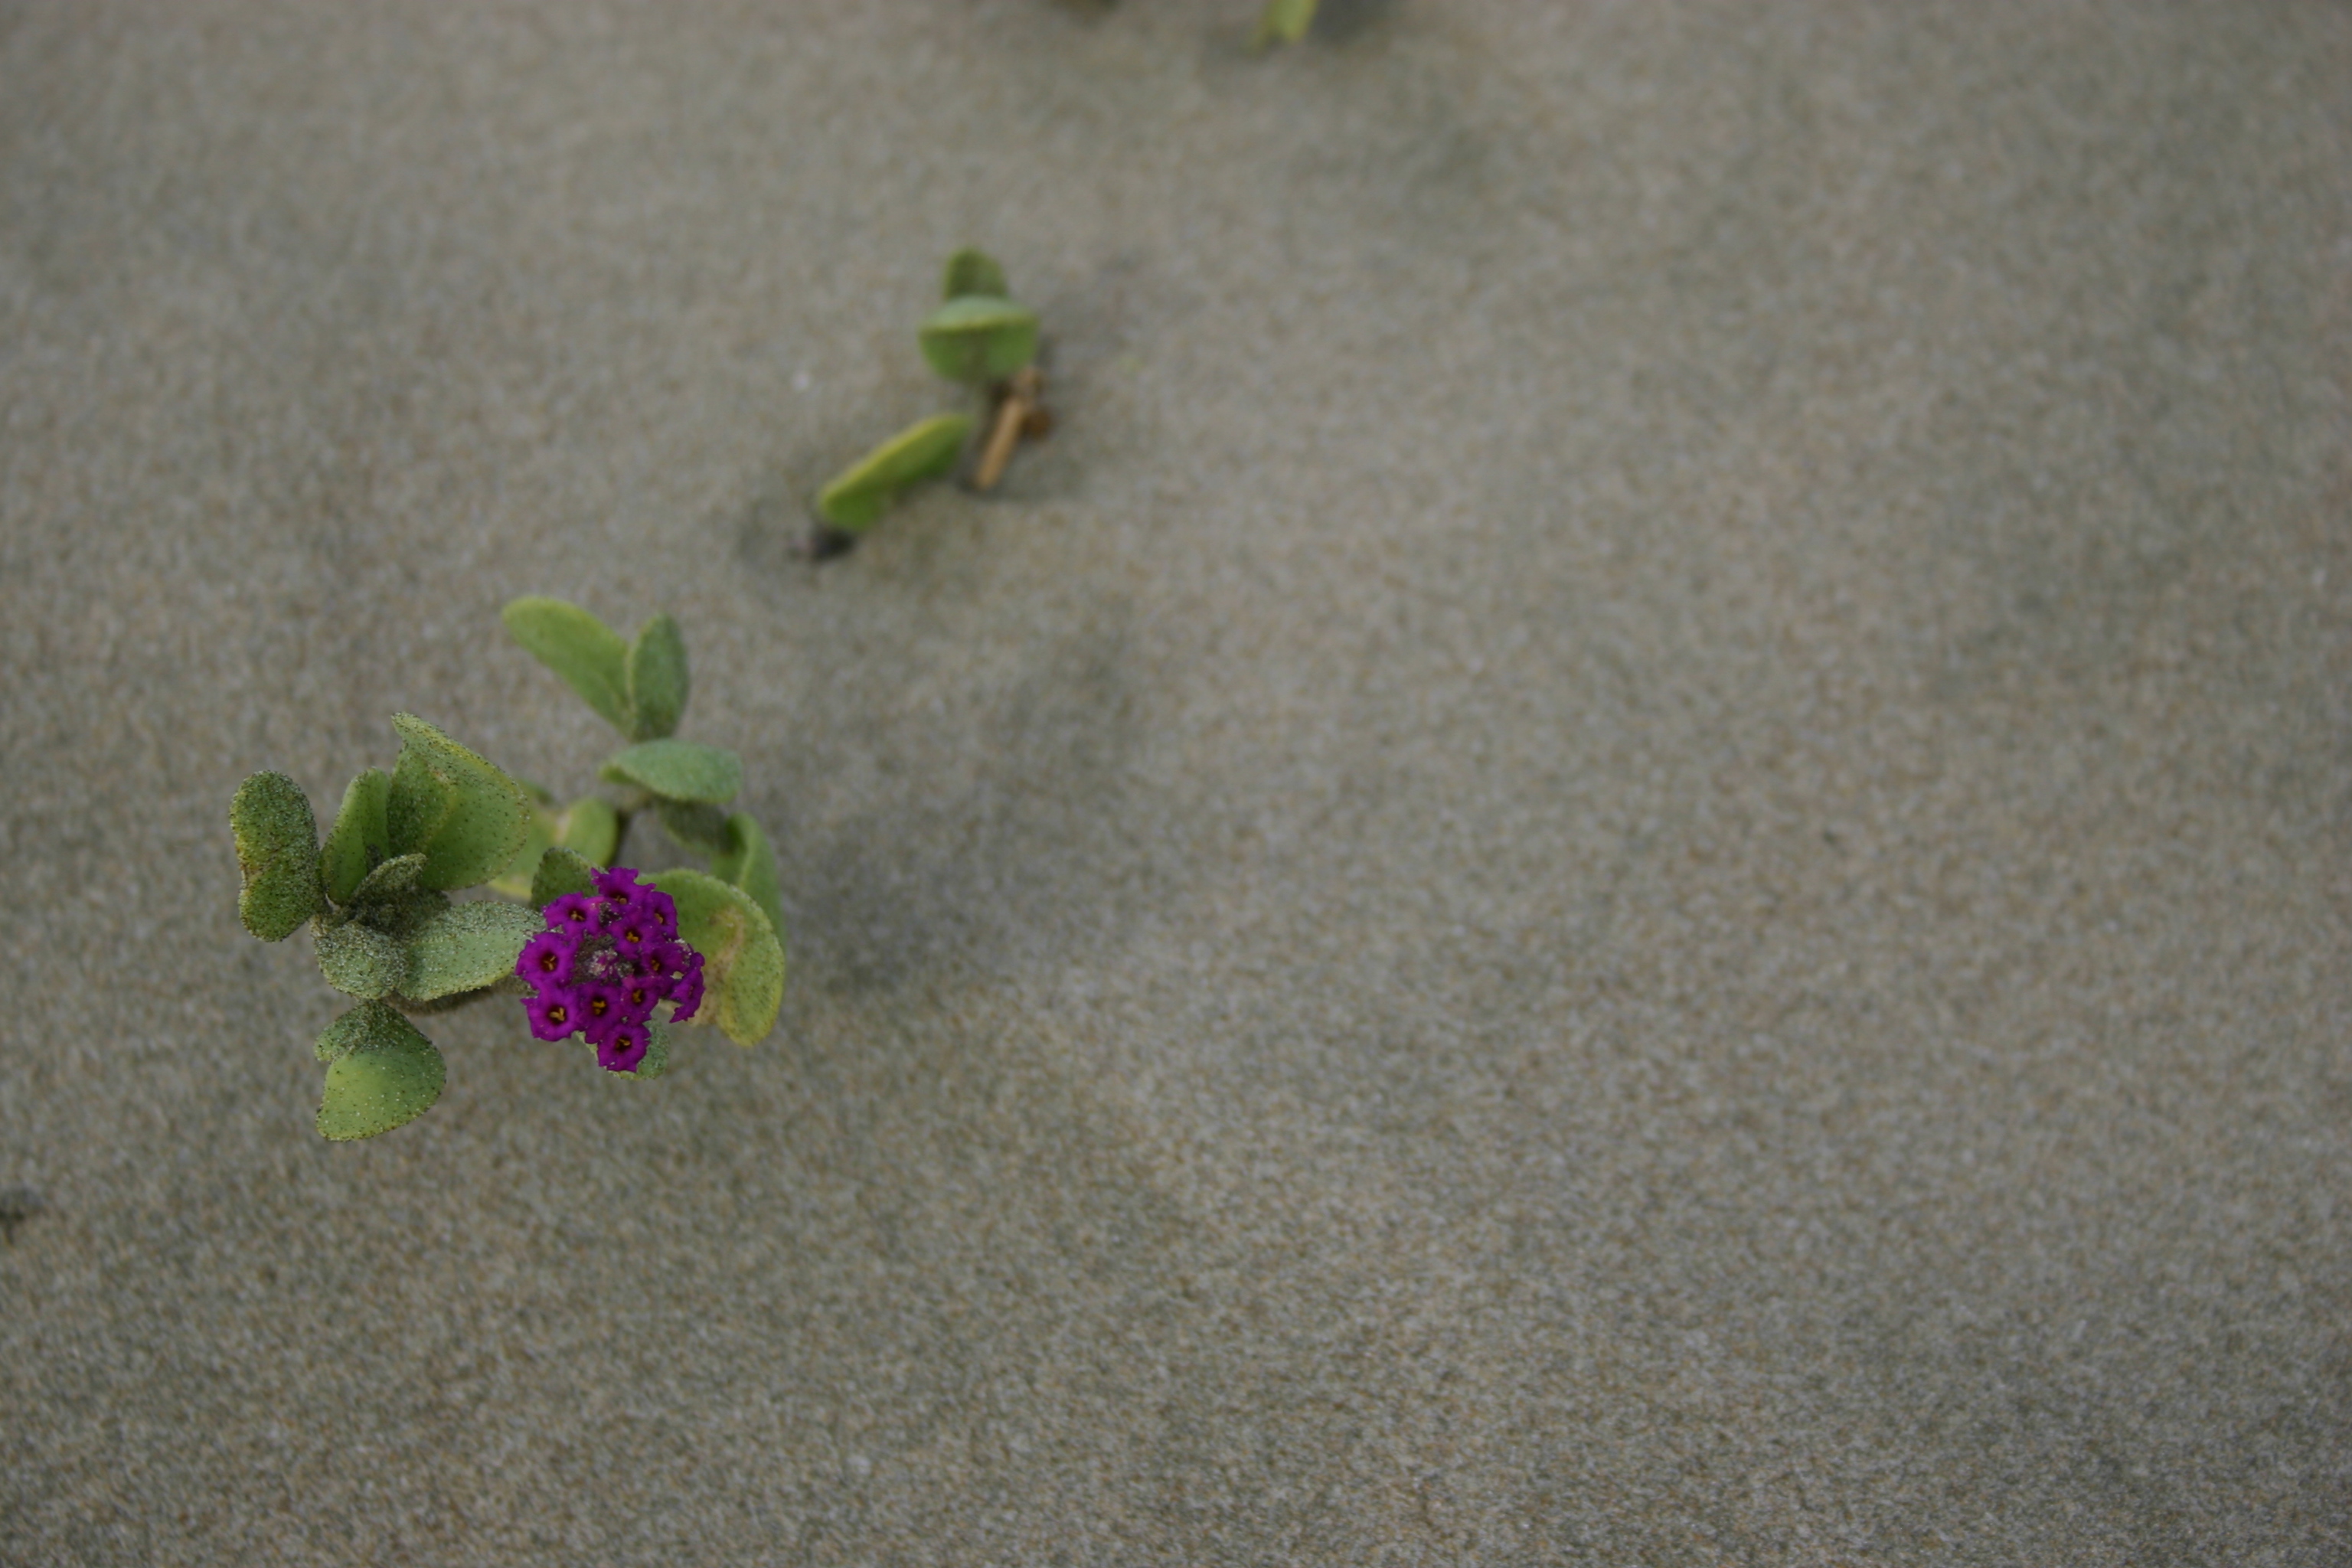 Little purple flowers growing in beach sand.  It resembles sand verbena, but I'm not sure.  (If you know the species, please let me know and I'll add the info!) 